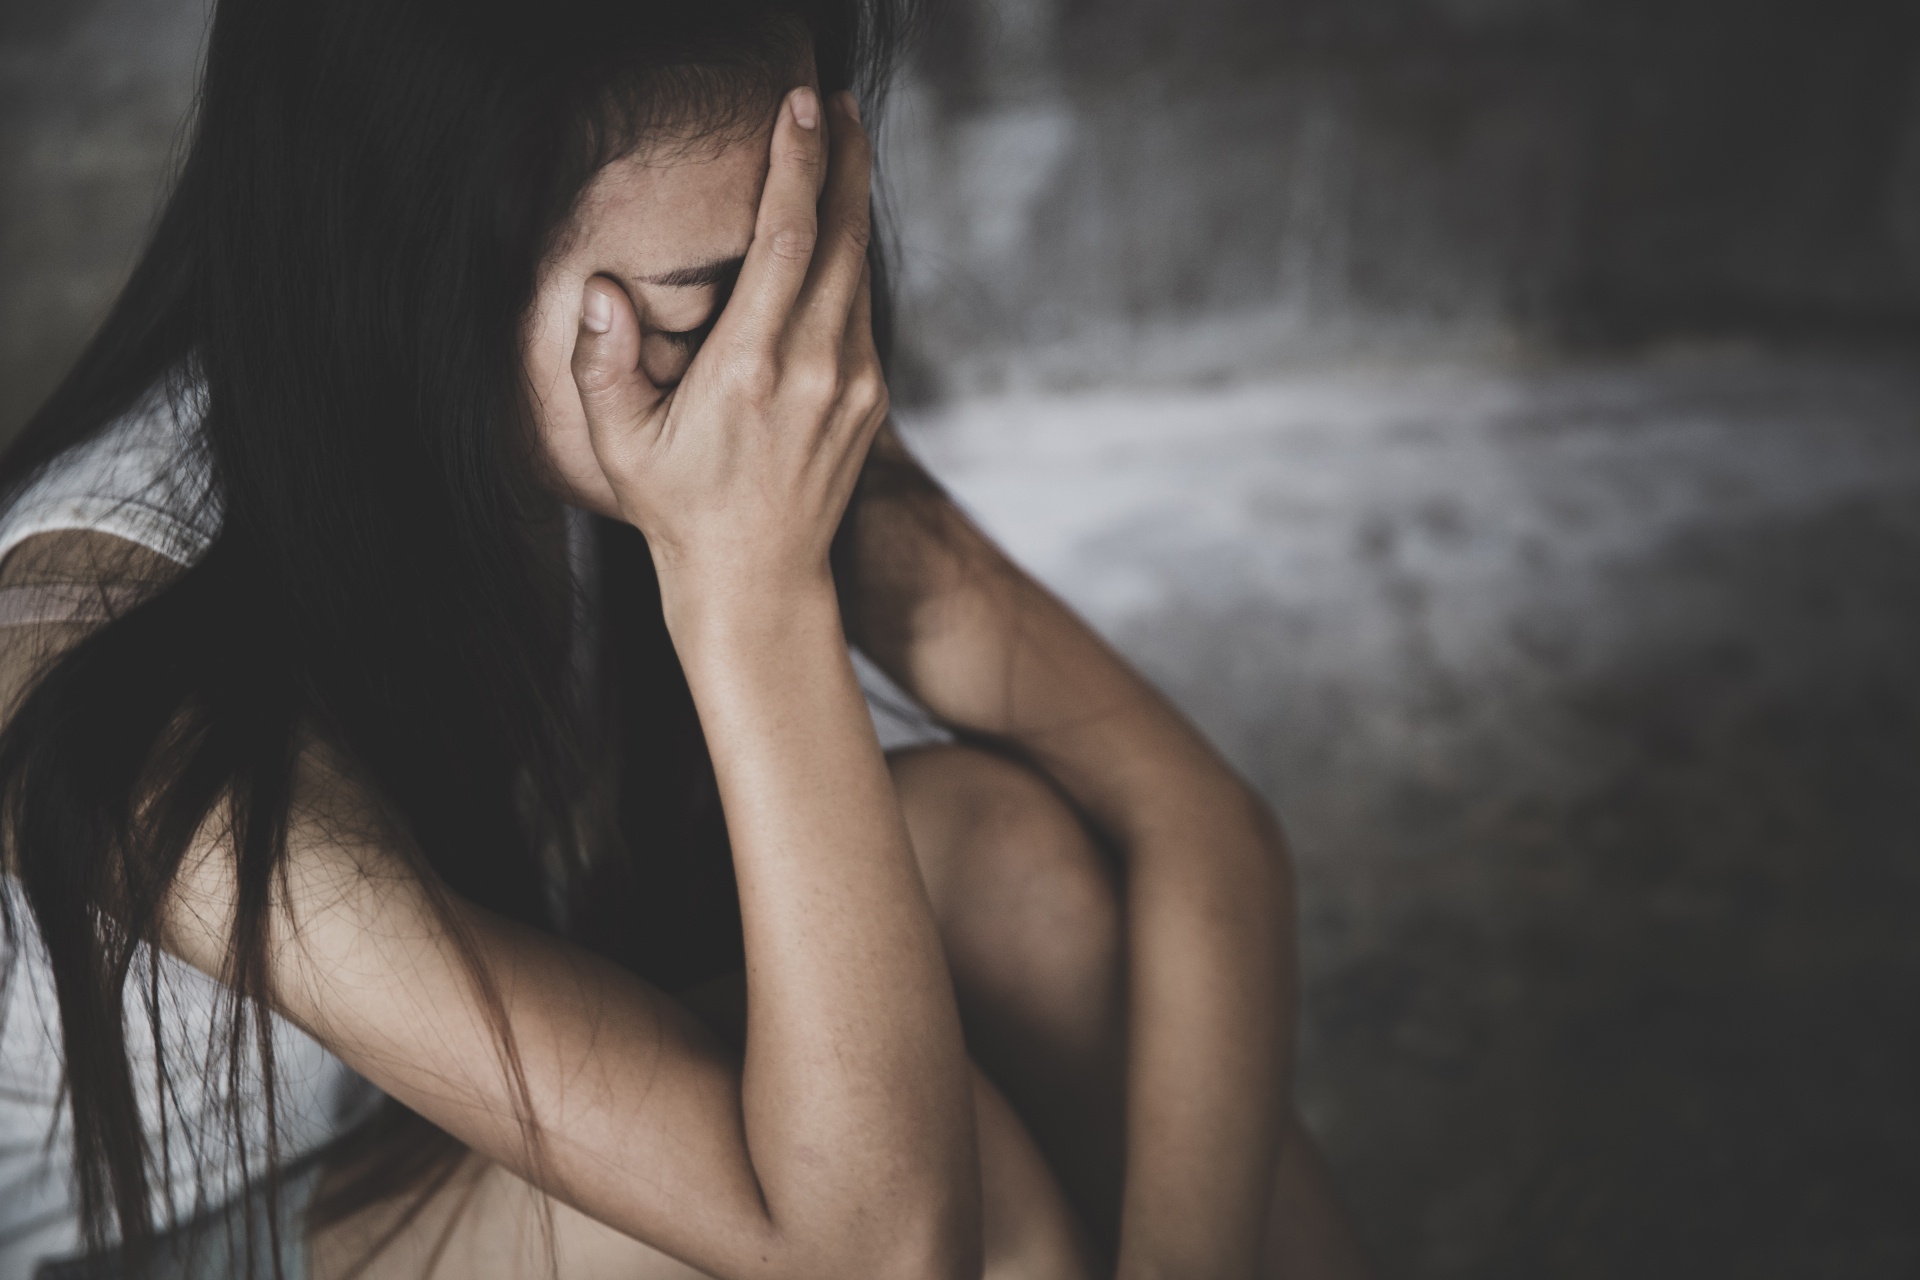 Image of a woman covering her face upset, Do you need PTSD treatment or complex PTSD treatment in Palm Beach, FL 33444? Then we have a ptsd therapist or complex ptsd therapist in Palm Beach, FL who can help. Call today! 33444 | 33483 | 33445